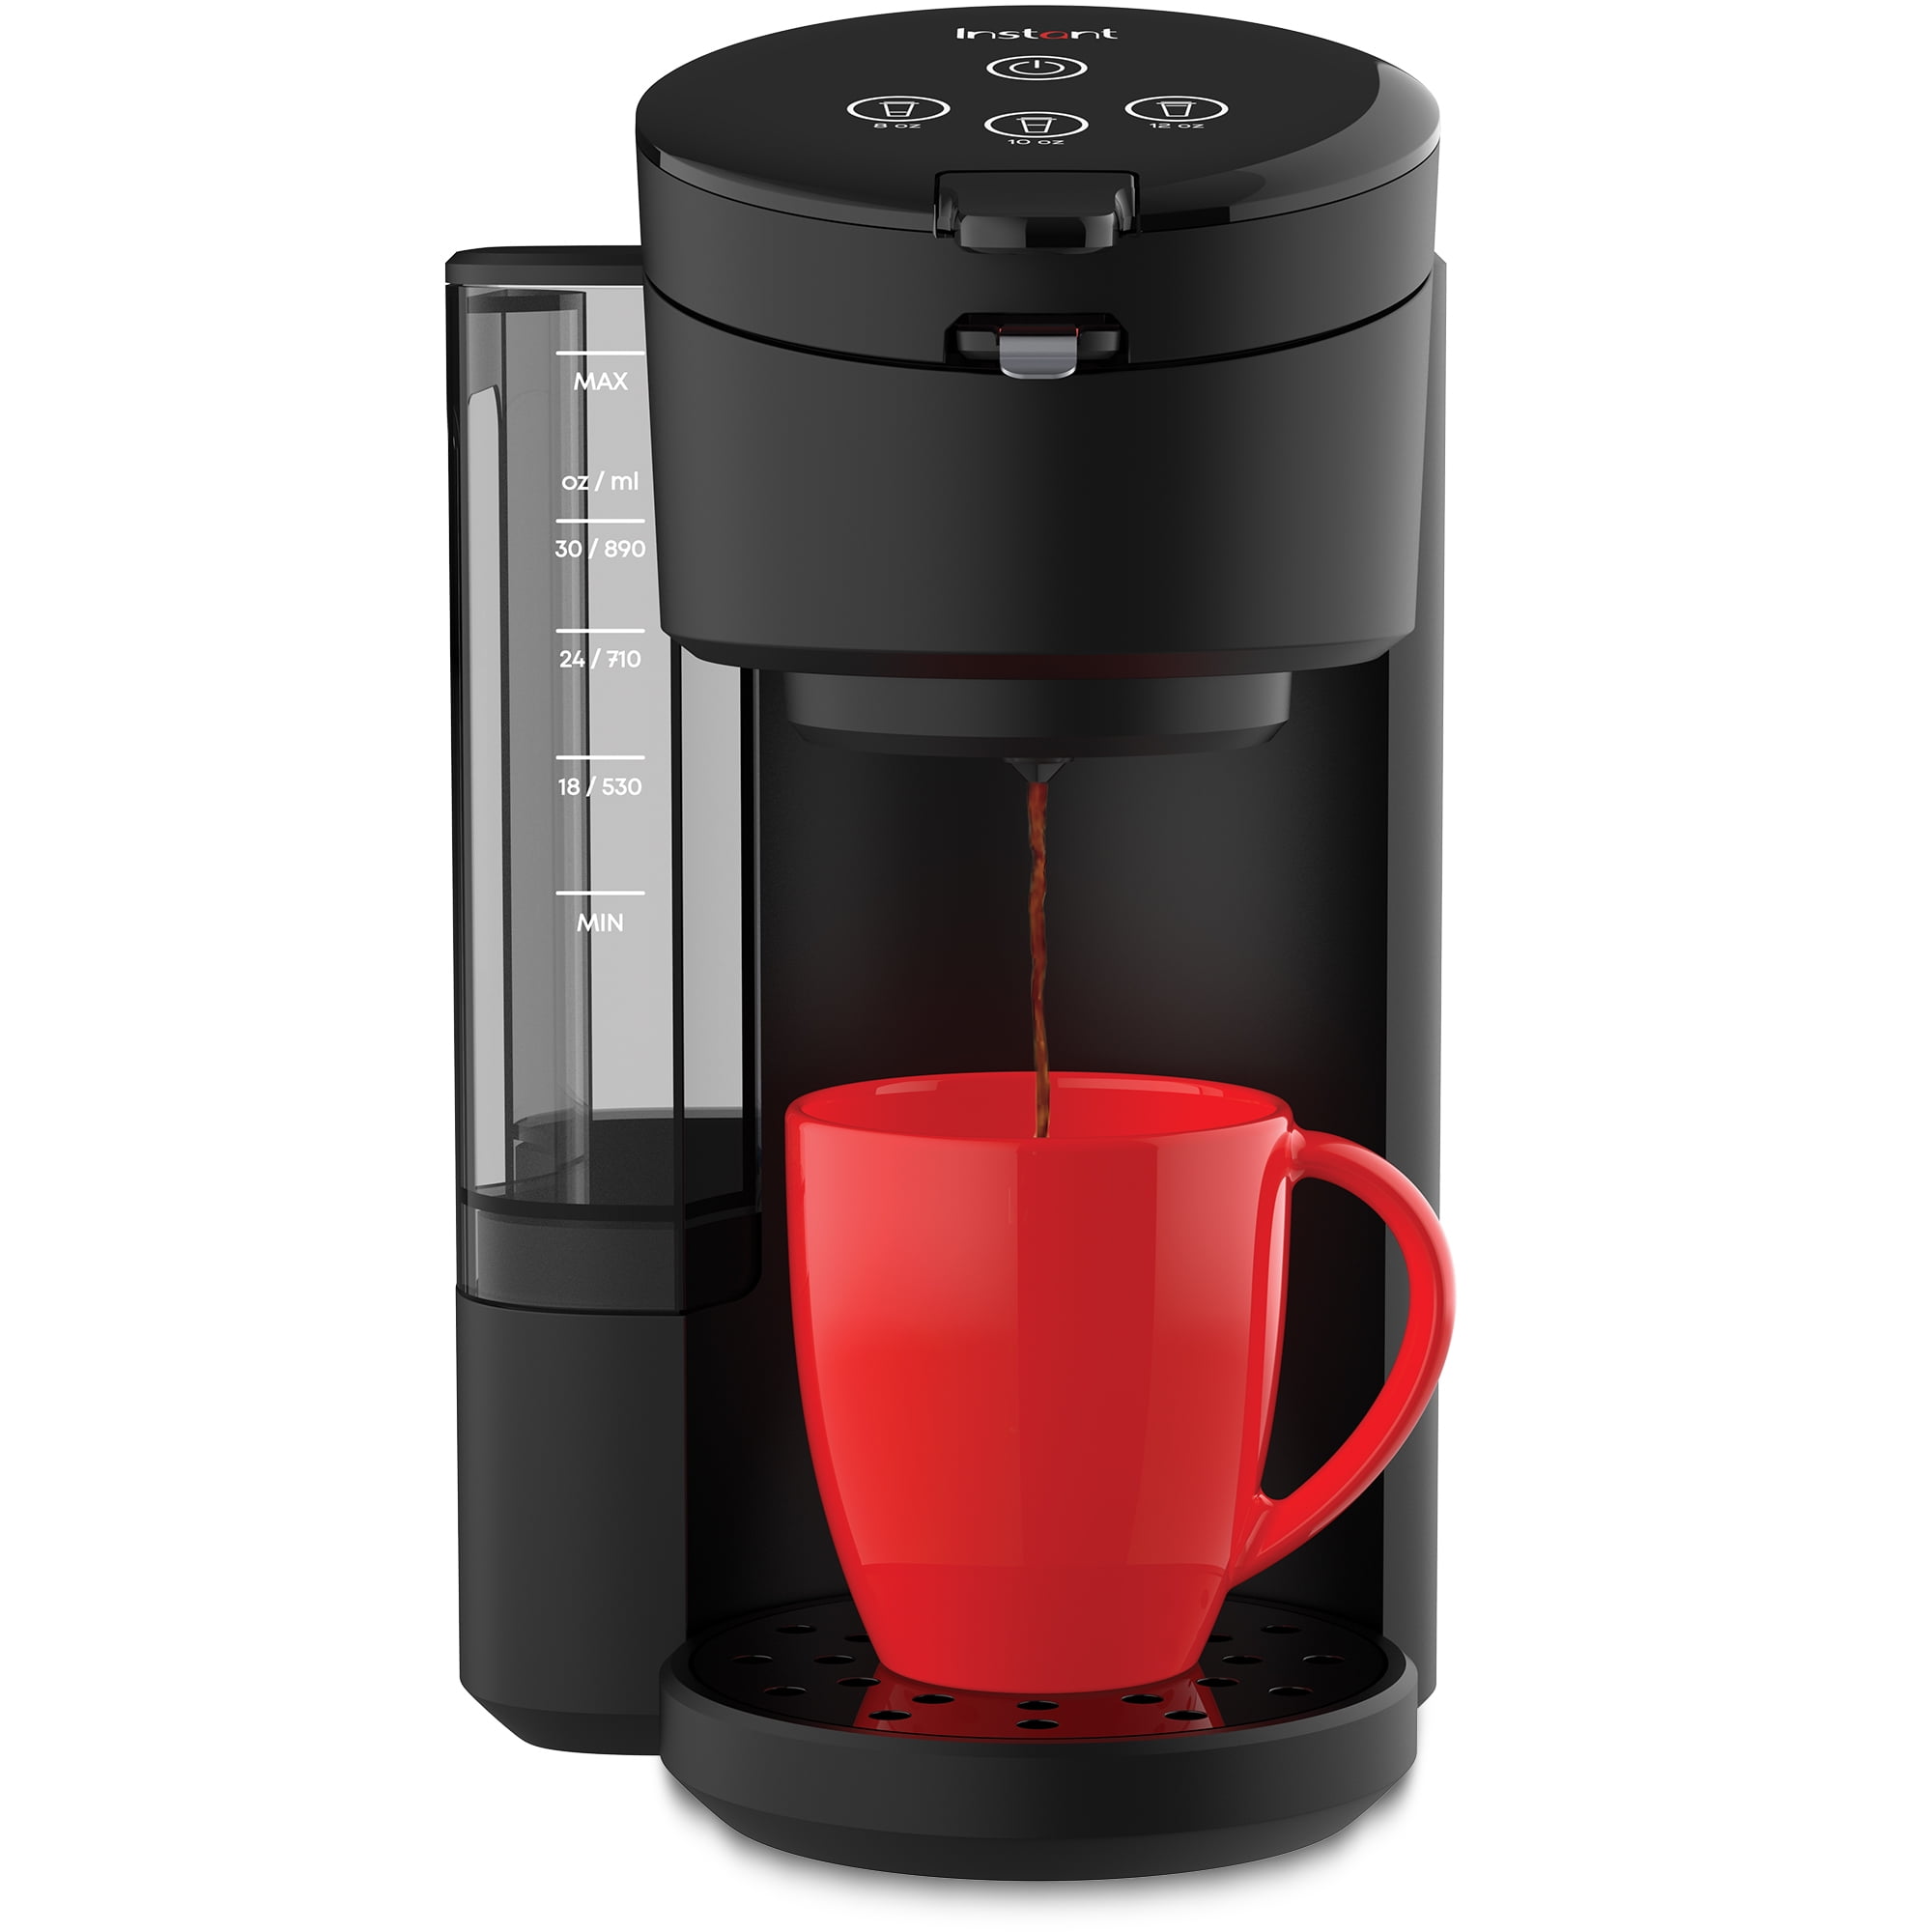 Black 2-in-1 Coffee Maker for K-Cup Pods